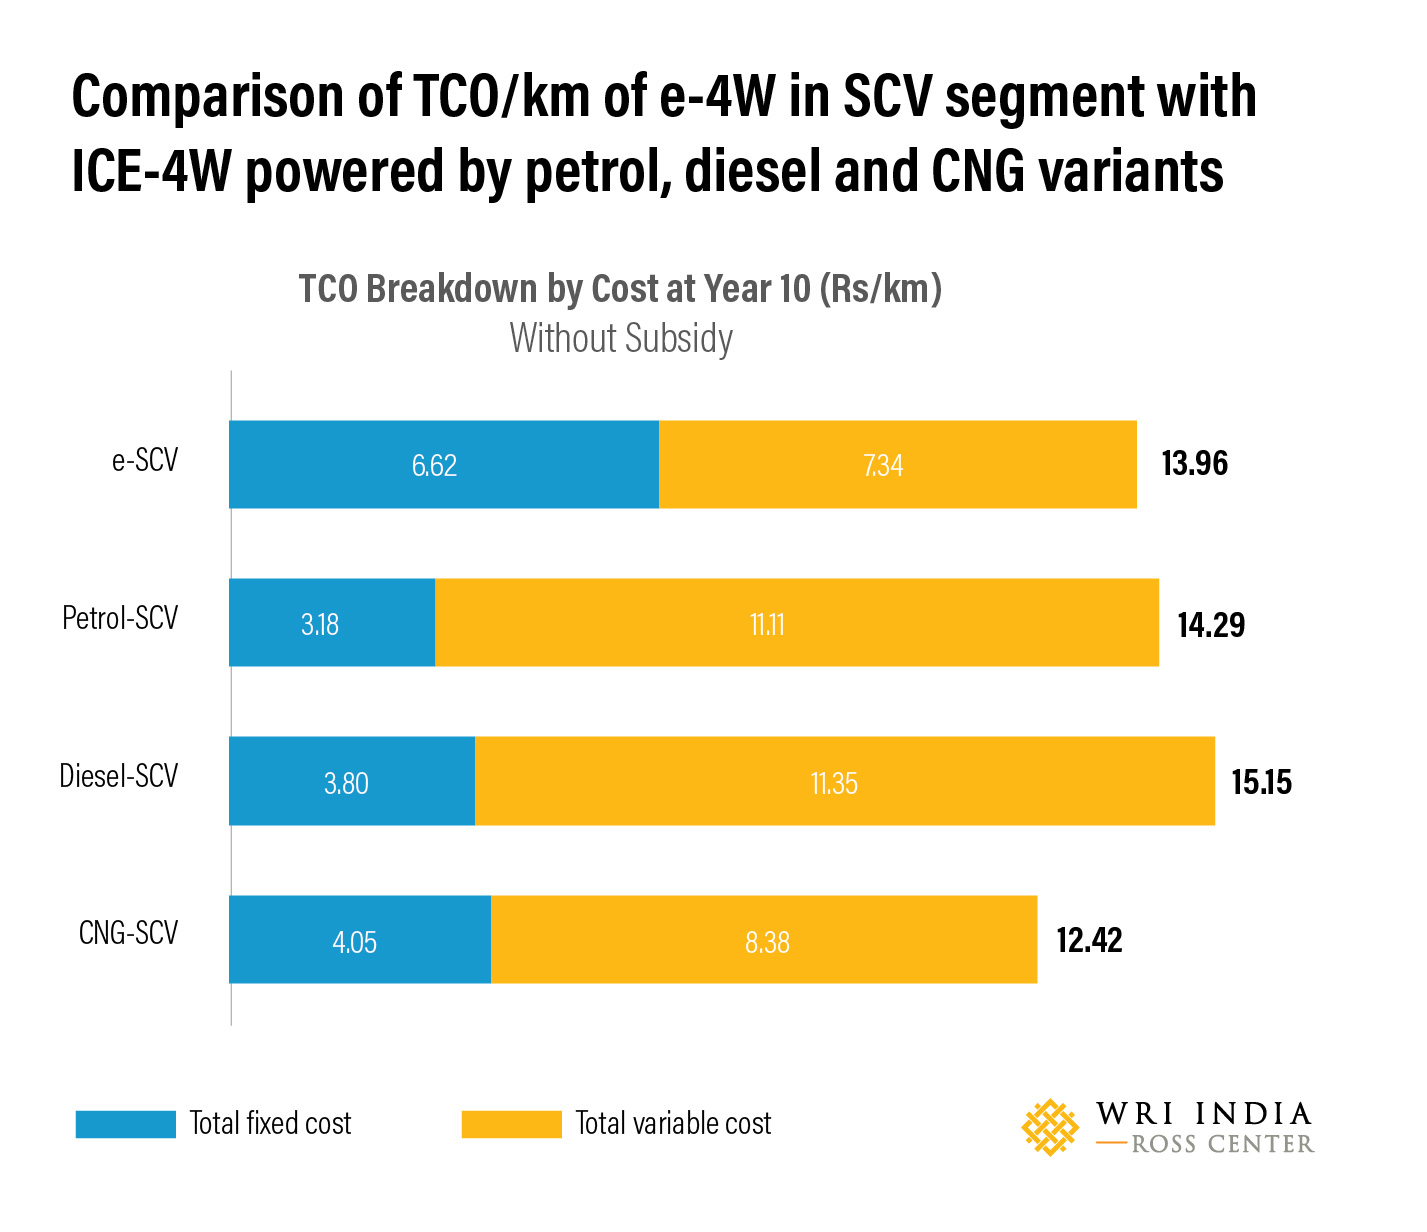 Comparison of TCO/km of e-4W in SCV segment with ICE-4W powered by petrol, diesel and CNG variants.